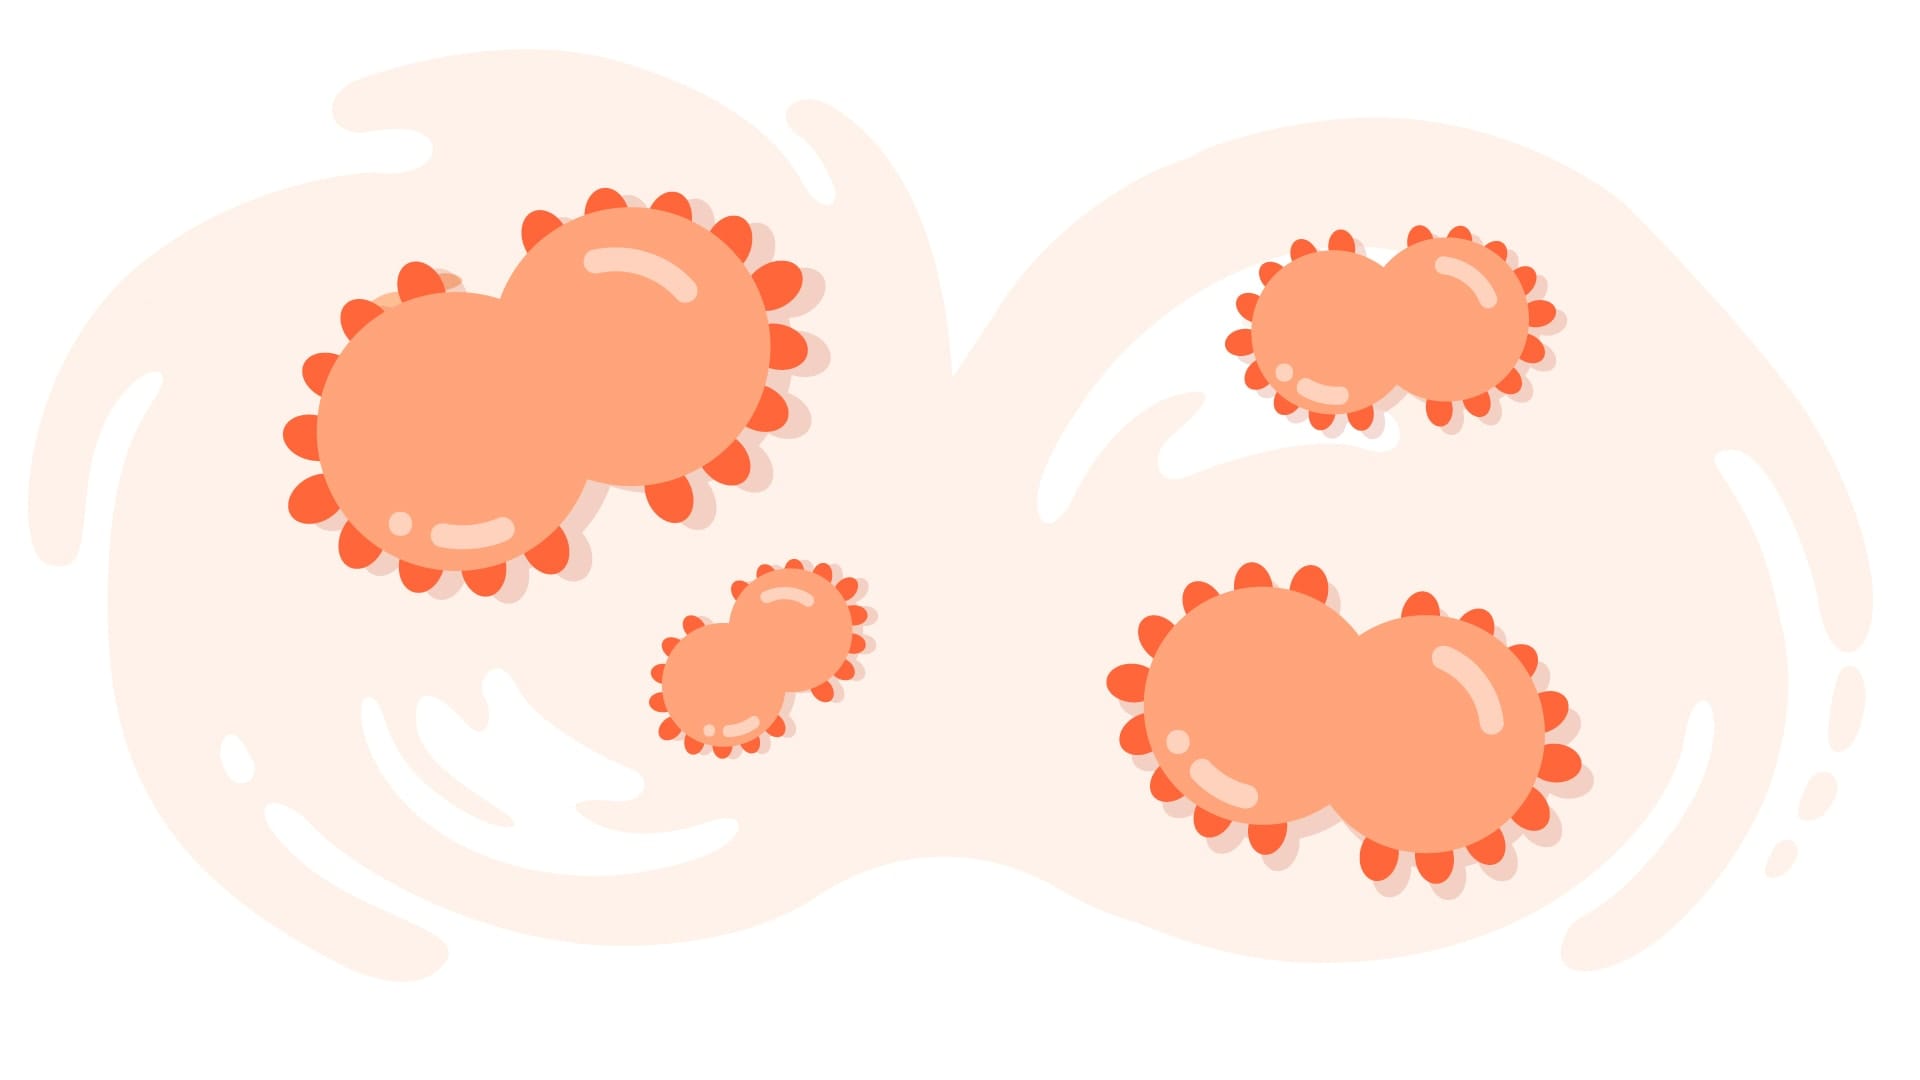 An illustration of Gonorrhea